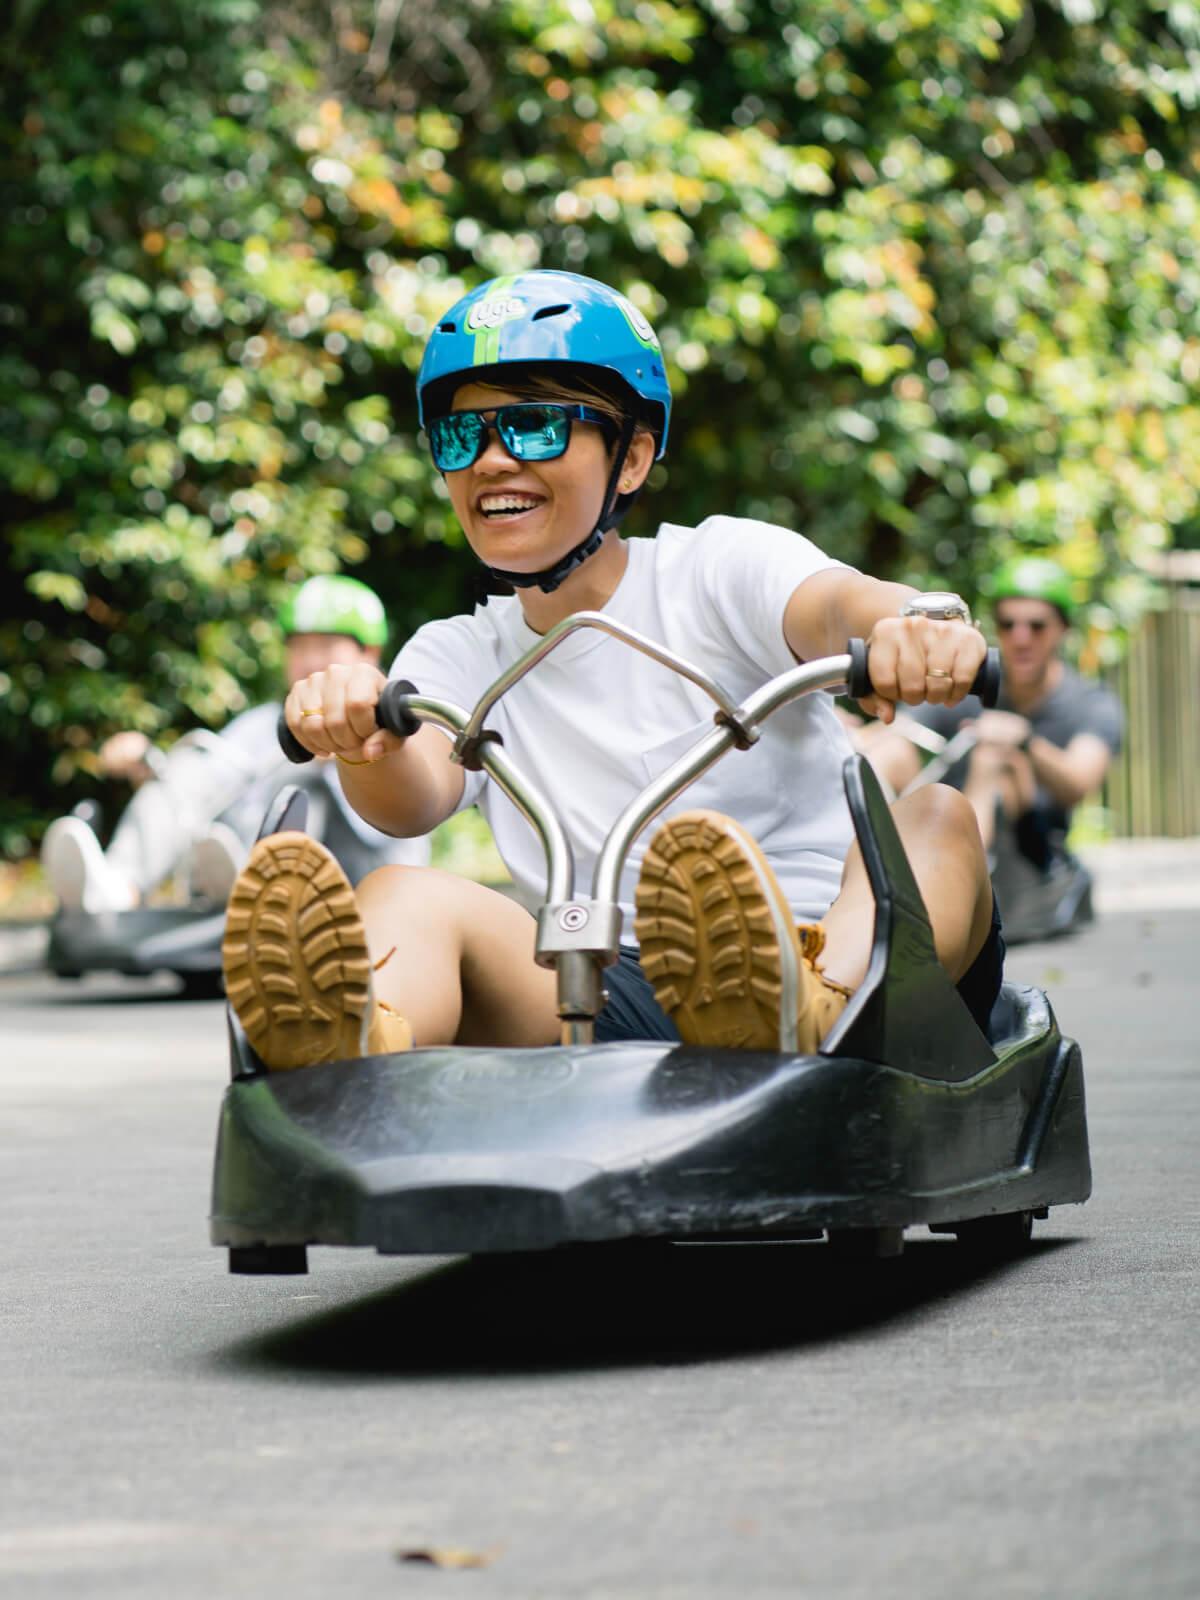 A customer smiles widely as she rides round a corner on the Luge tracks.